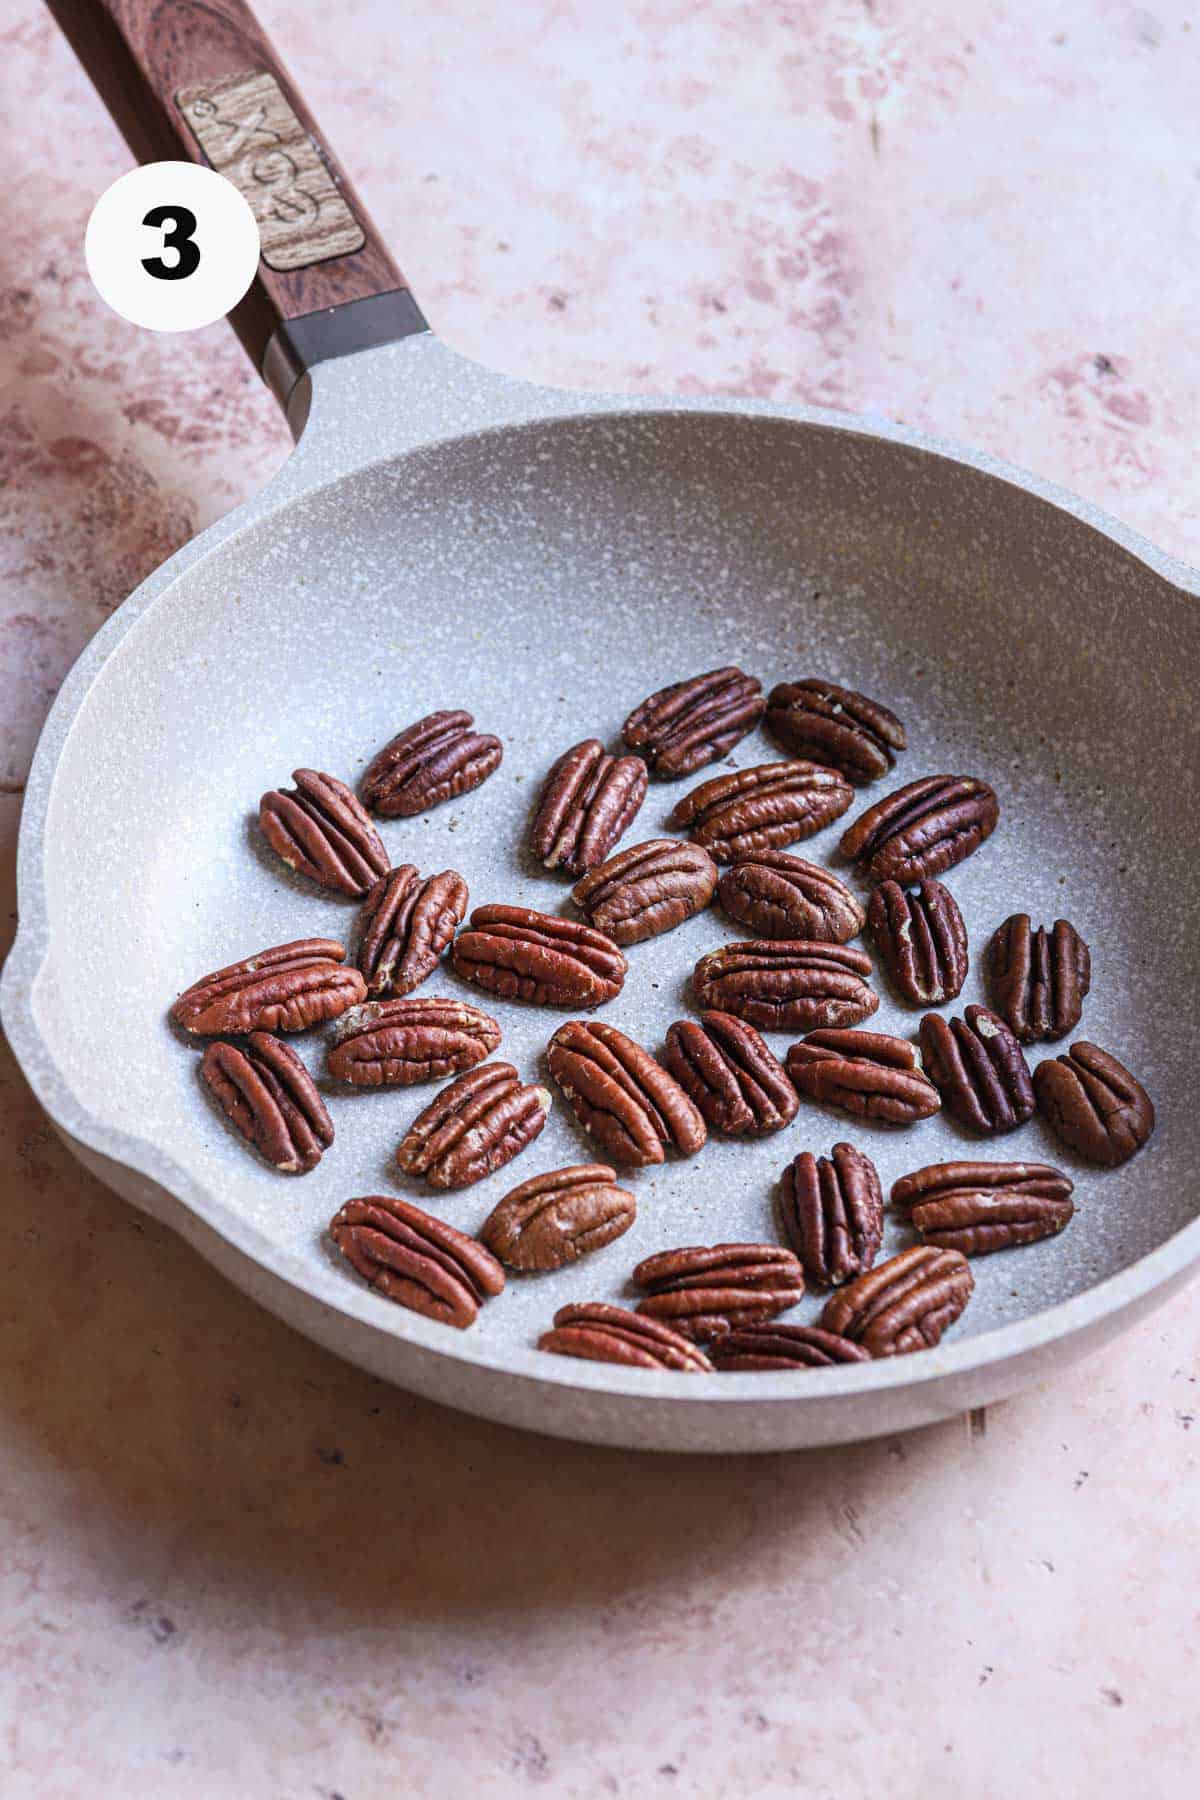 Toasted pecans in a skillet.